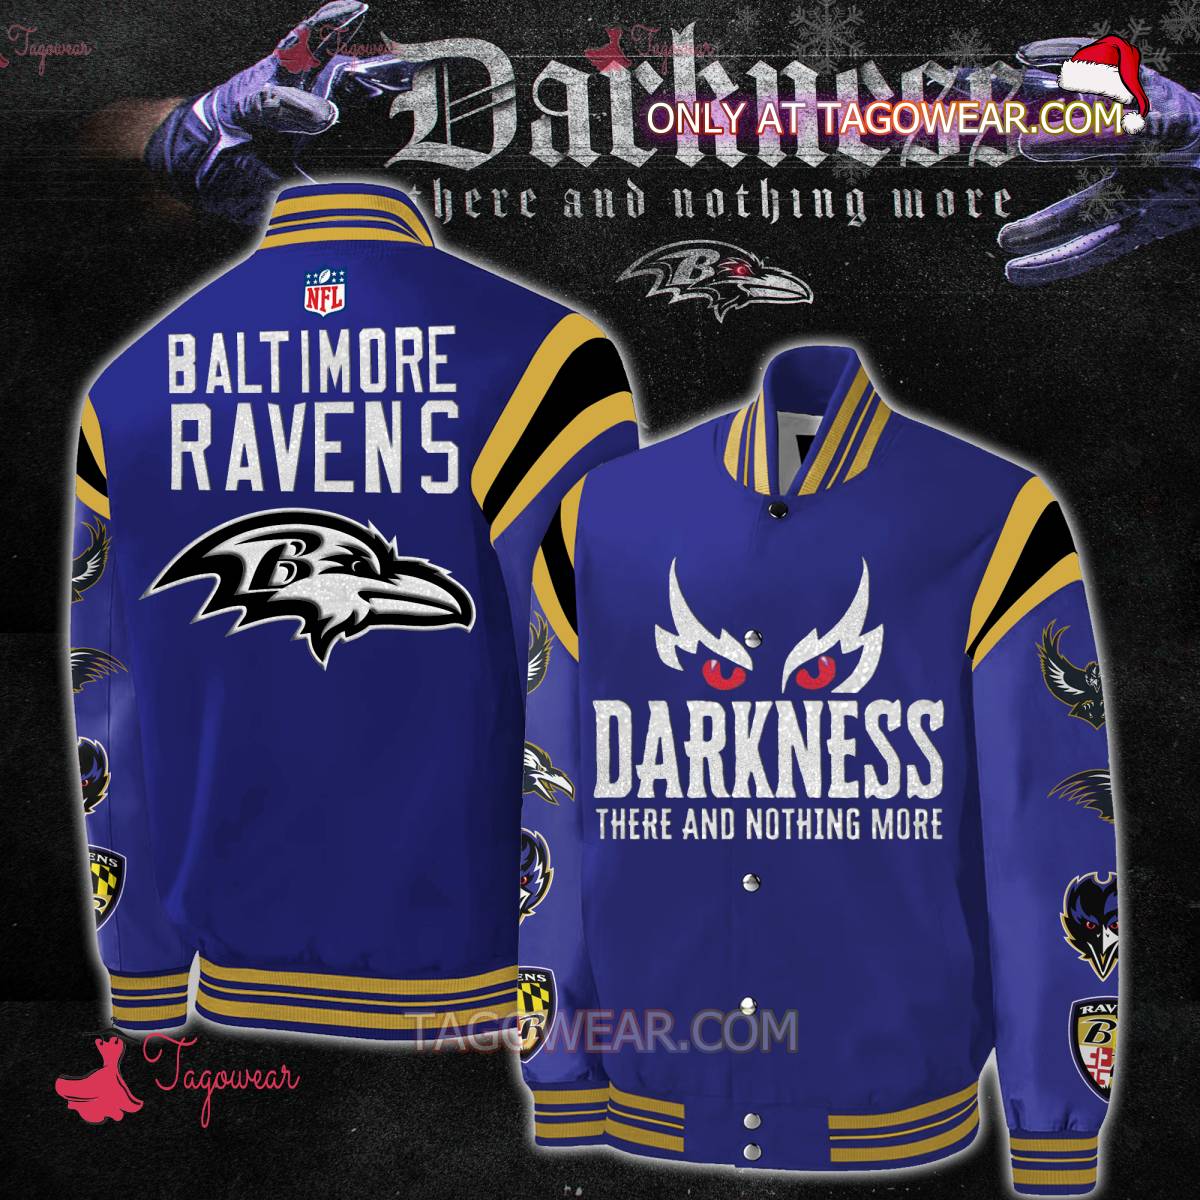 Baltimore Ravens Darkness There And Nothing More Baseball Jacket